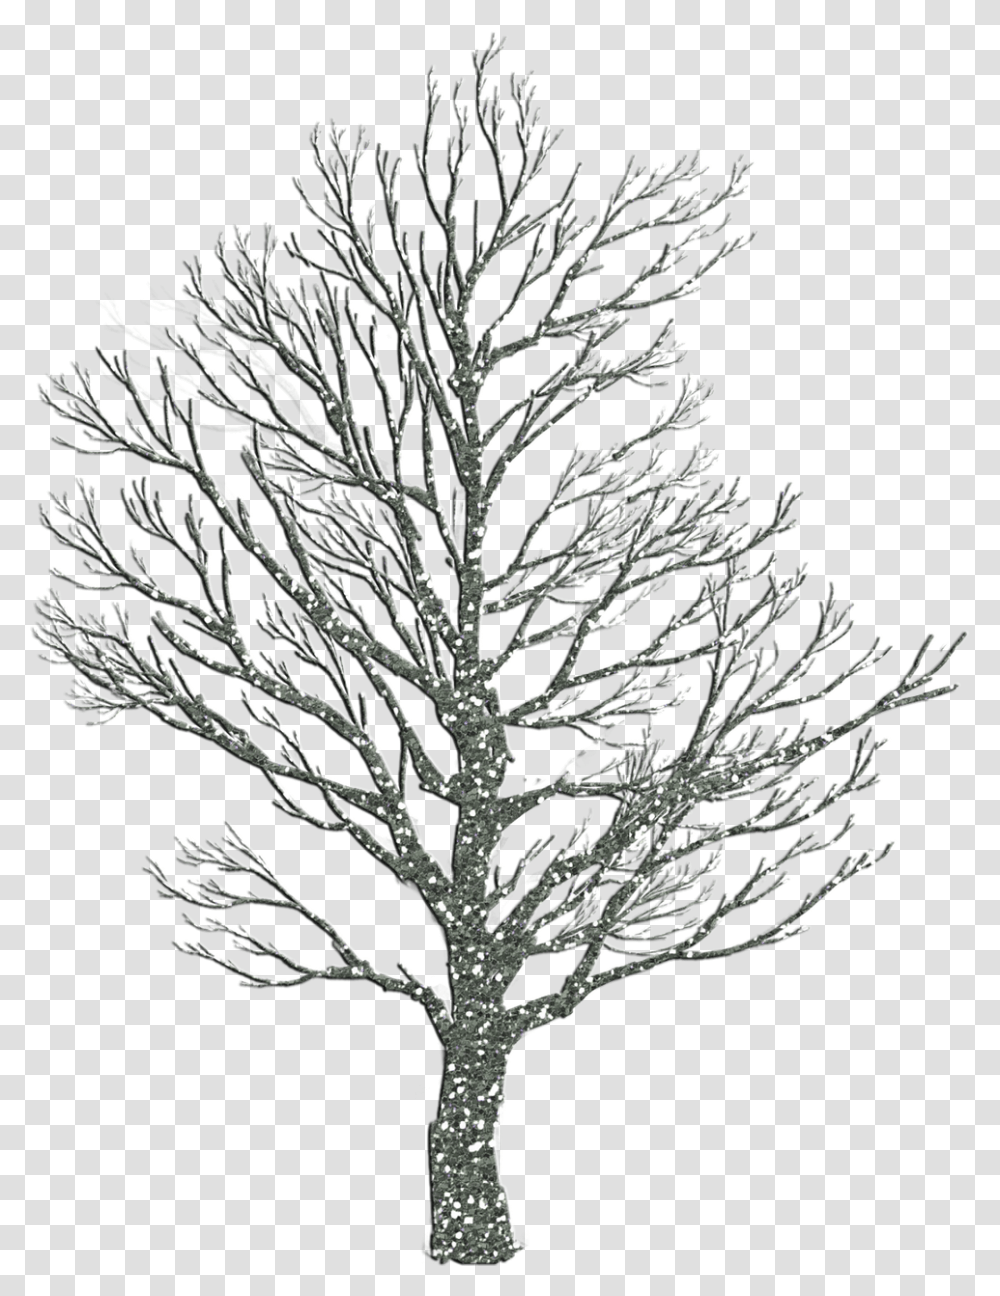 Tree Christmas Holiday Free Picture Sad Tree Wallpaper Hd, Plant, Tree Trunk, Oak Transparent Png